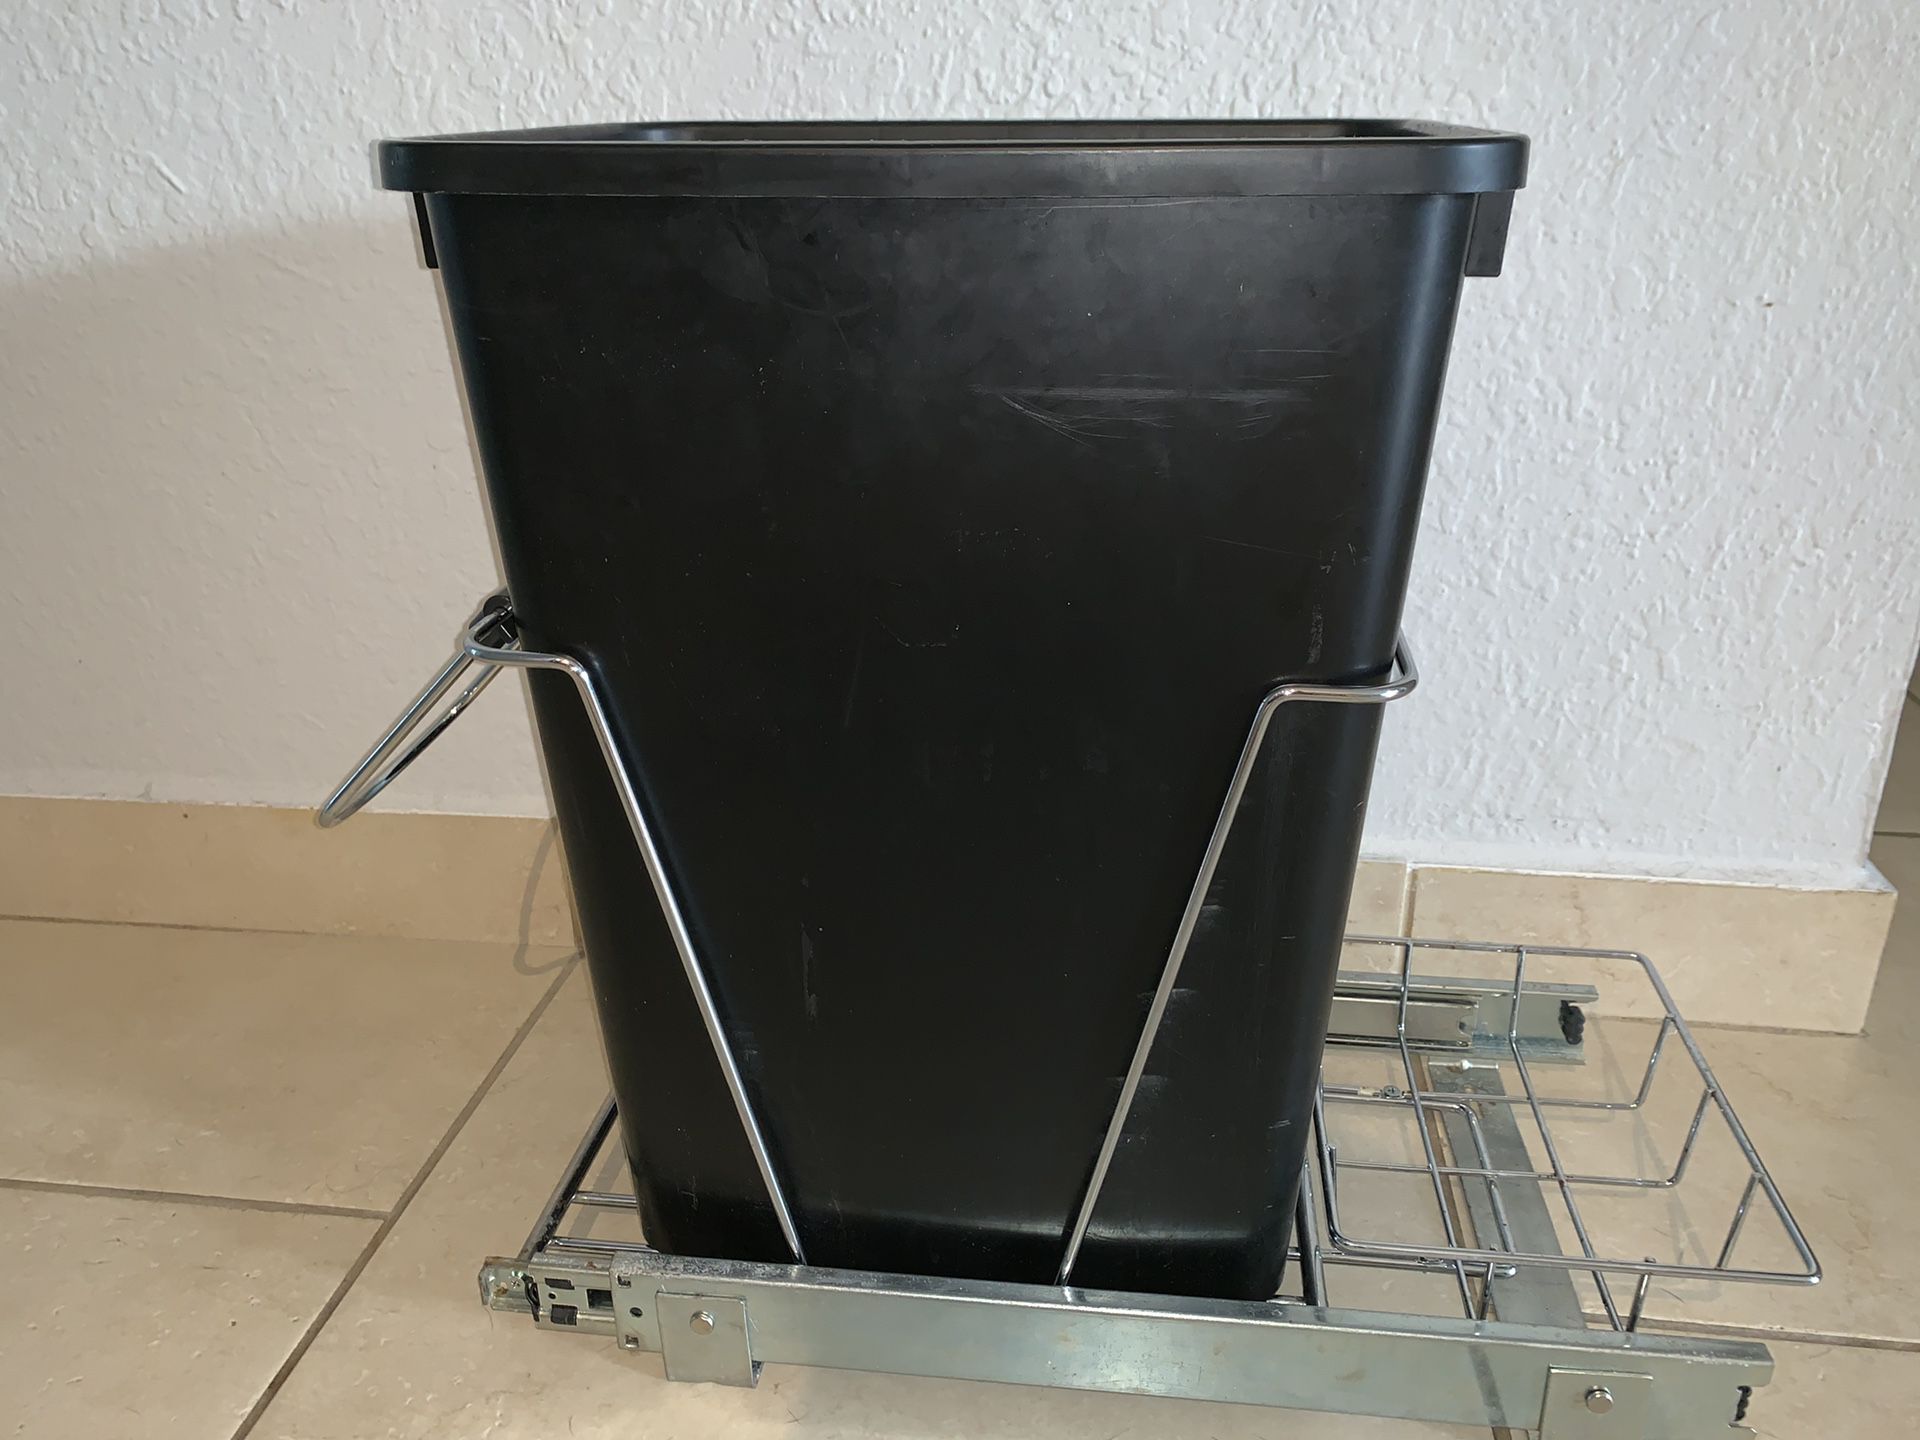 Waste container pullout for inside cabinet with storage shelf